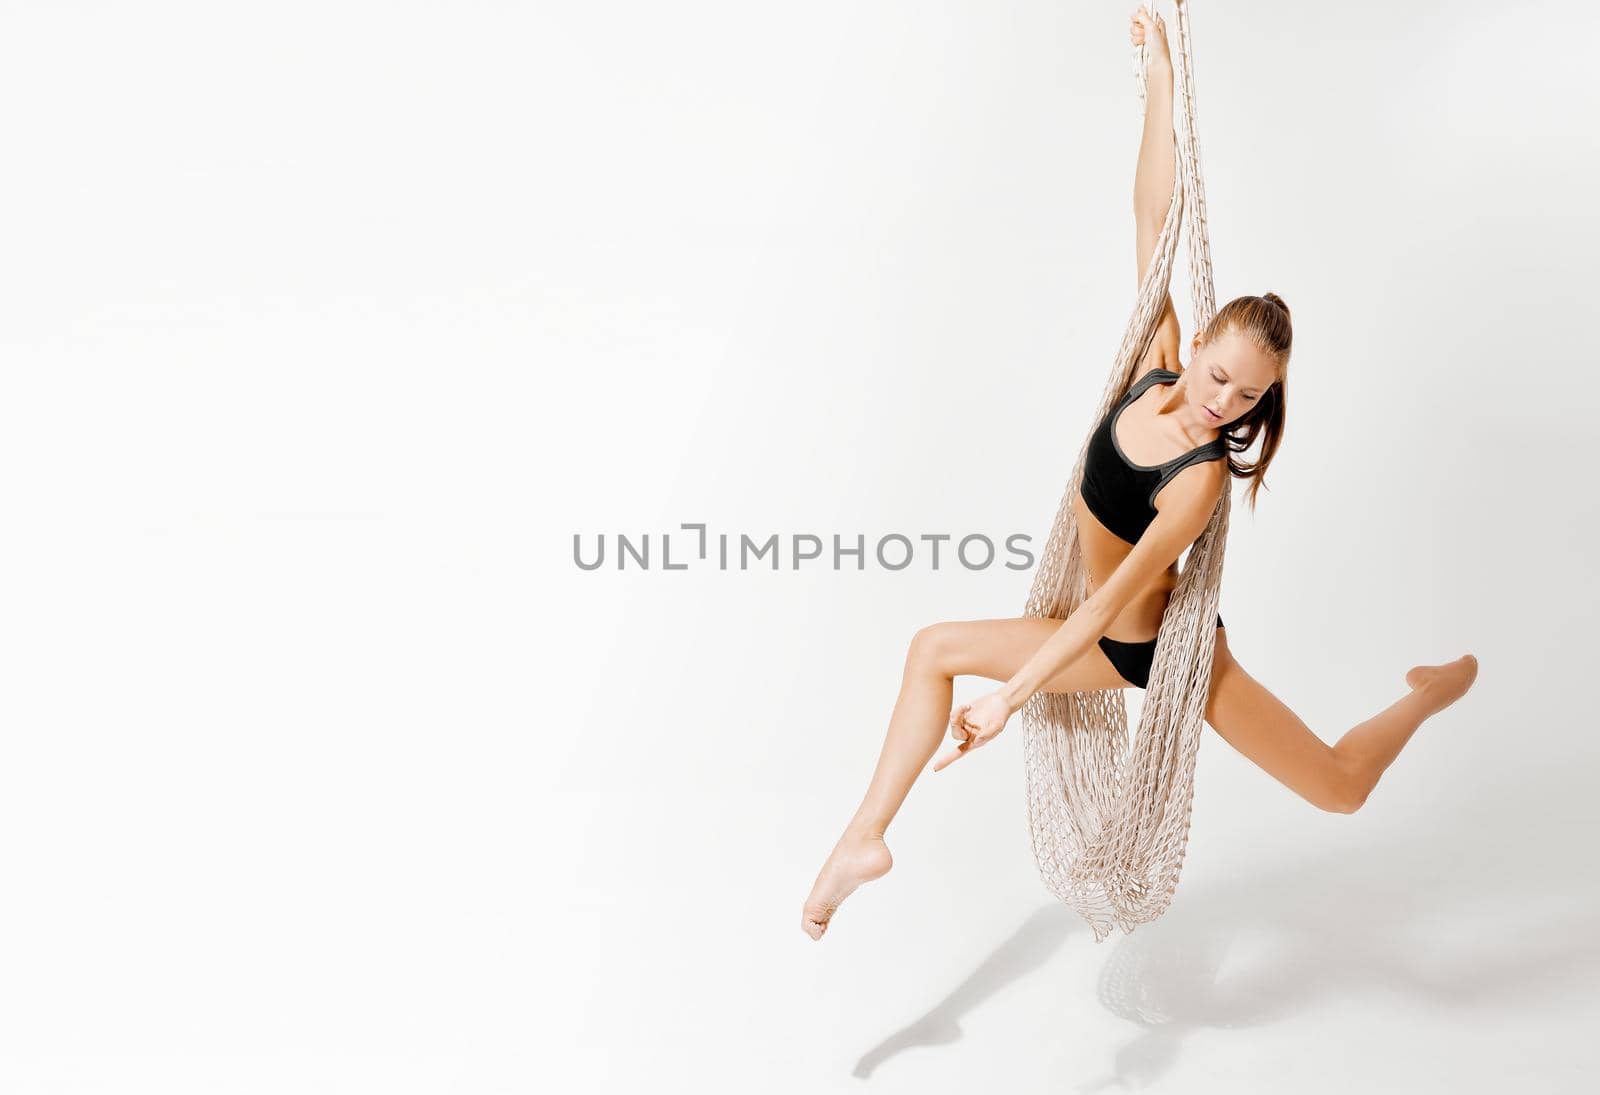 A person acrobat with net posing for a picture on white background high